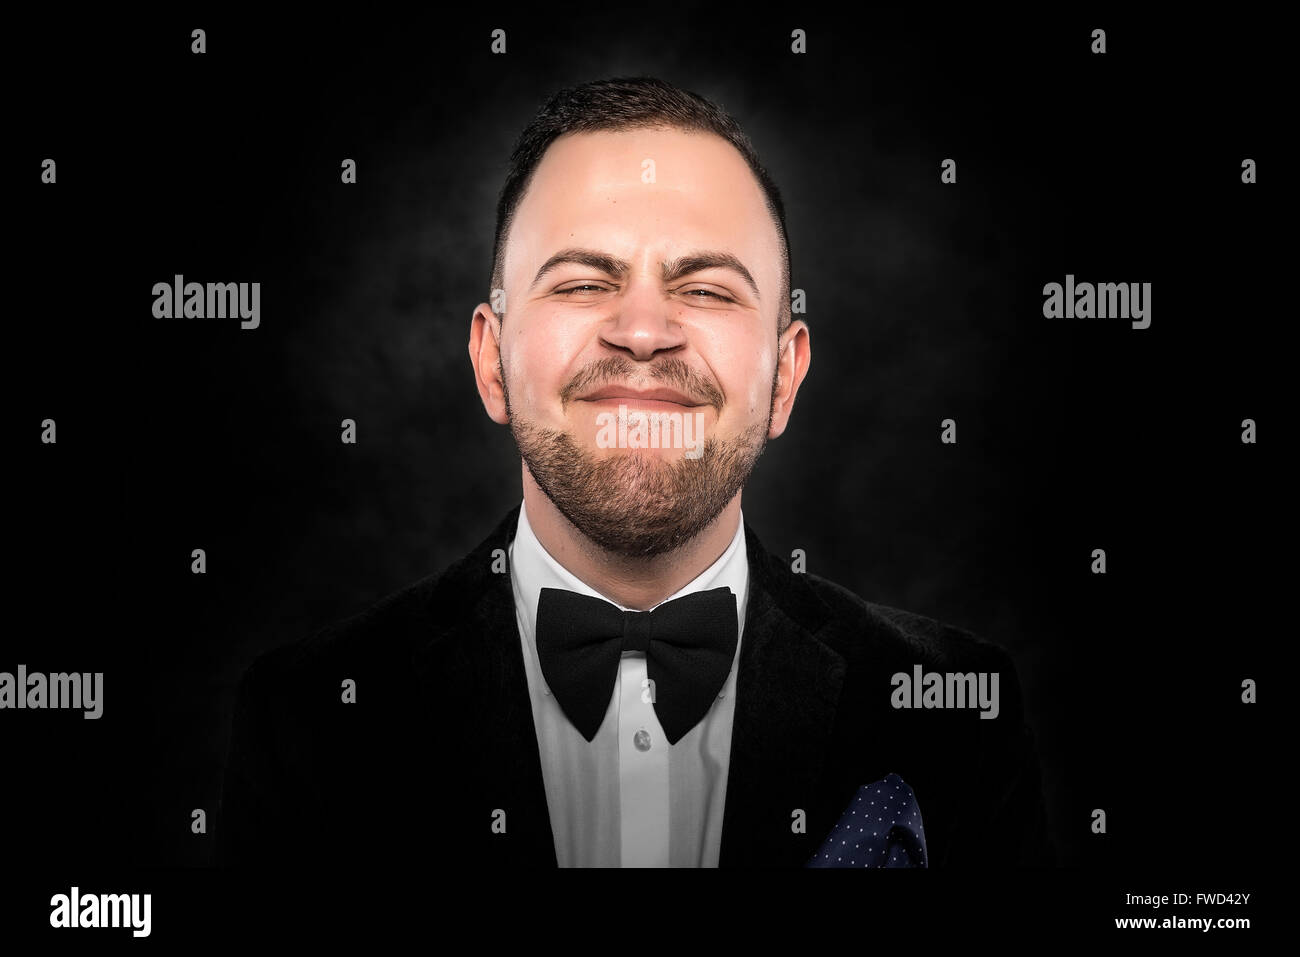 Man in suit makes funny face over dark background Stock Photo